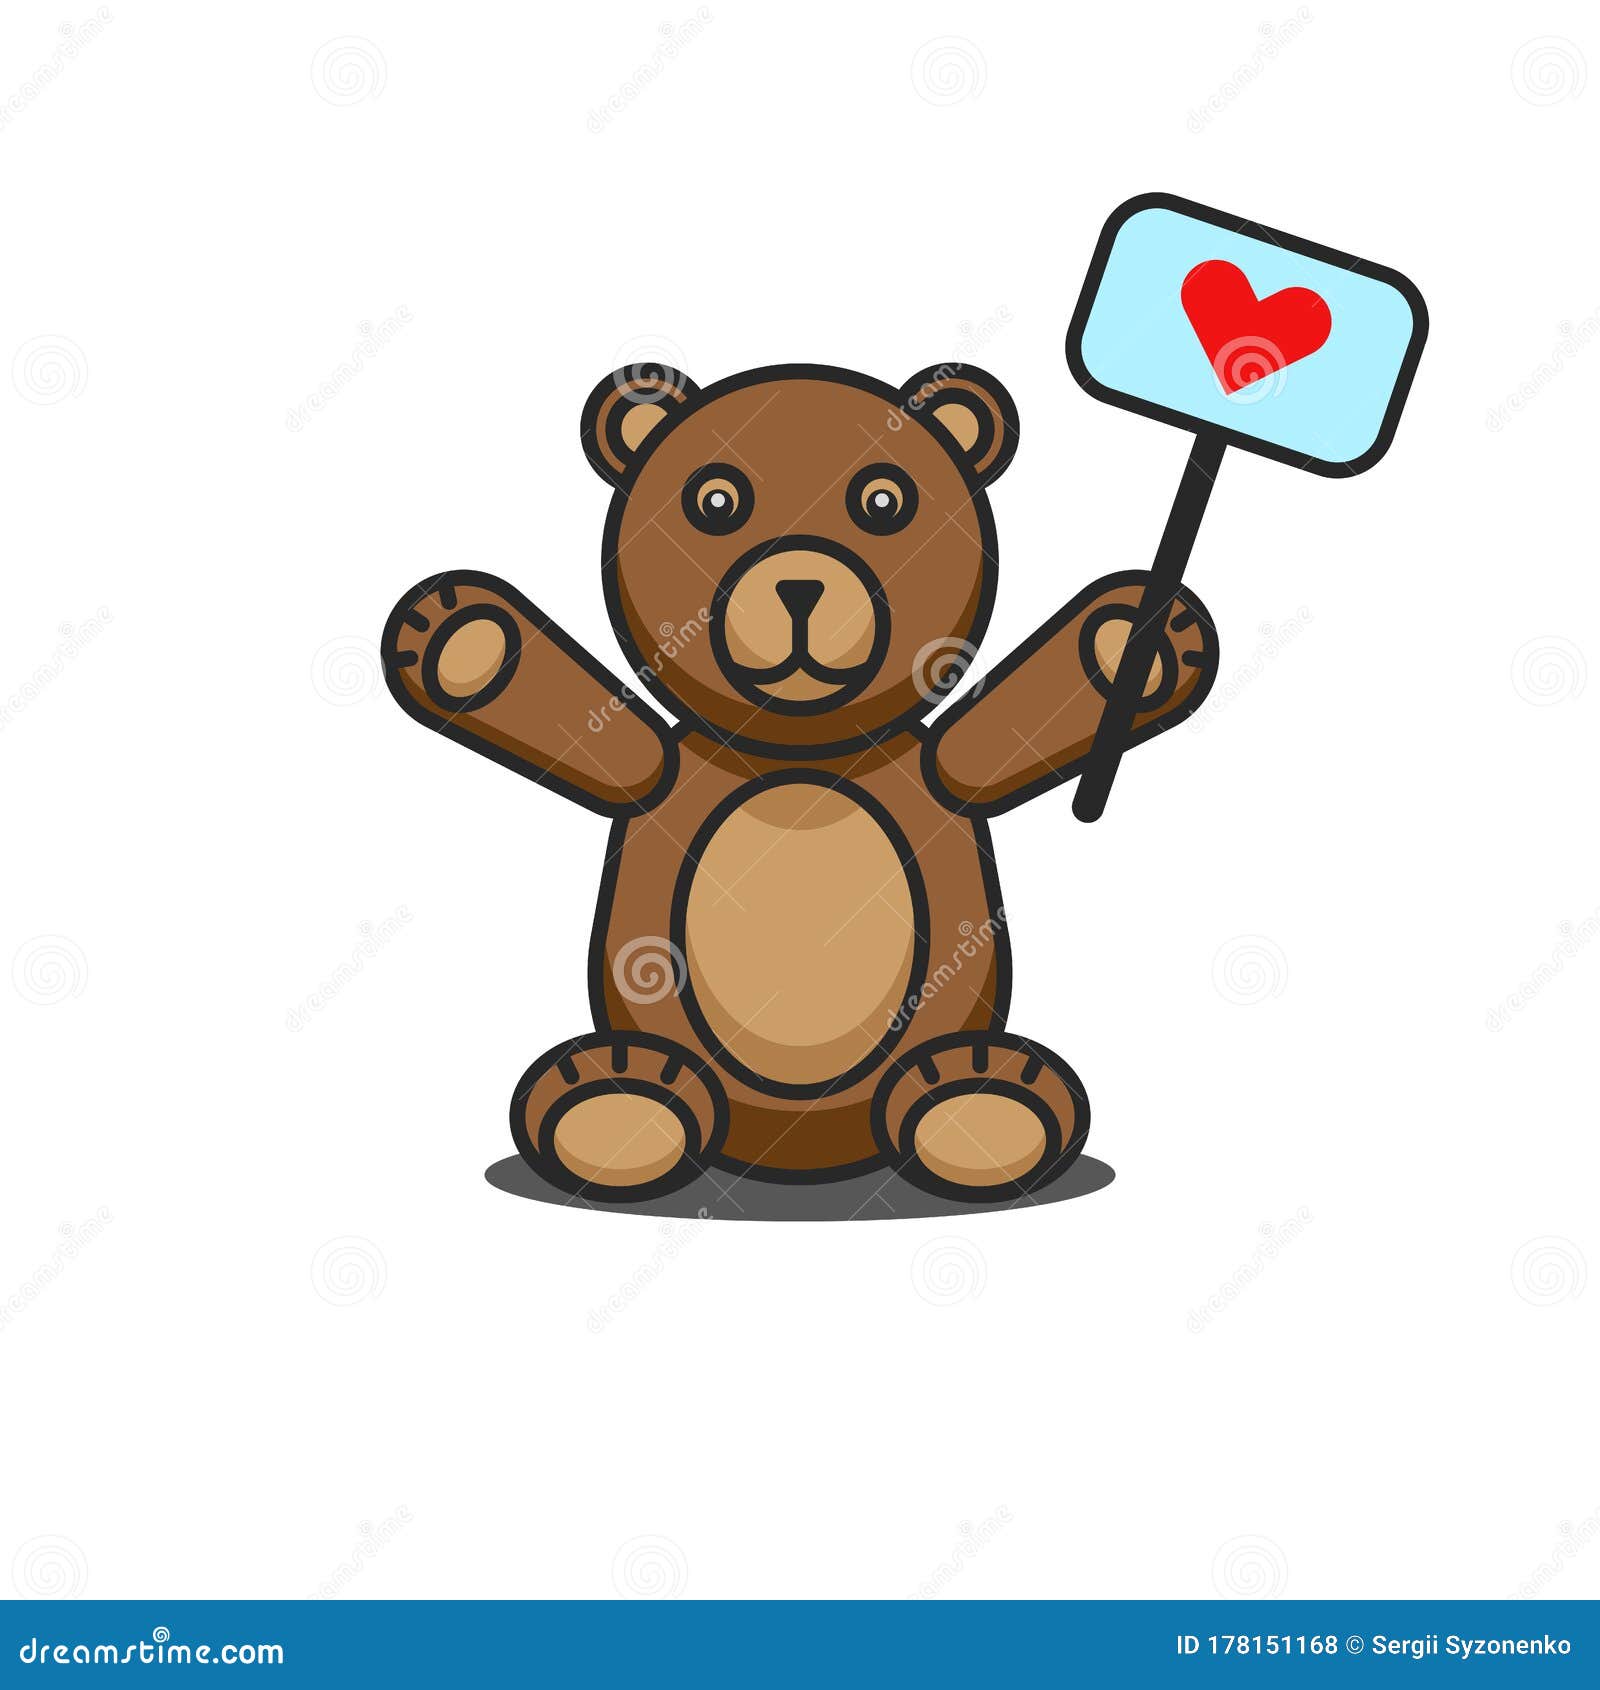 Teddy Bear Funny Cartoon Character Sitting With Raised Paws And A Sign